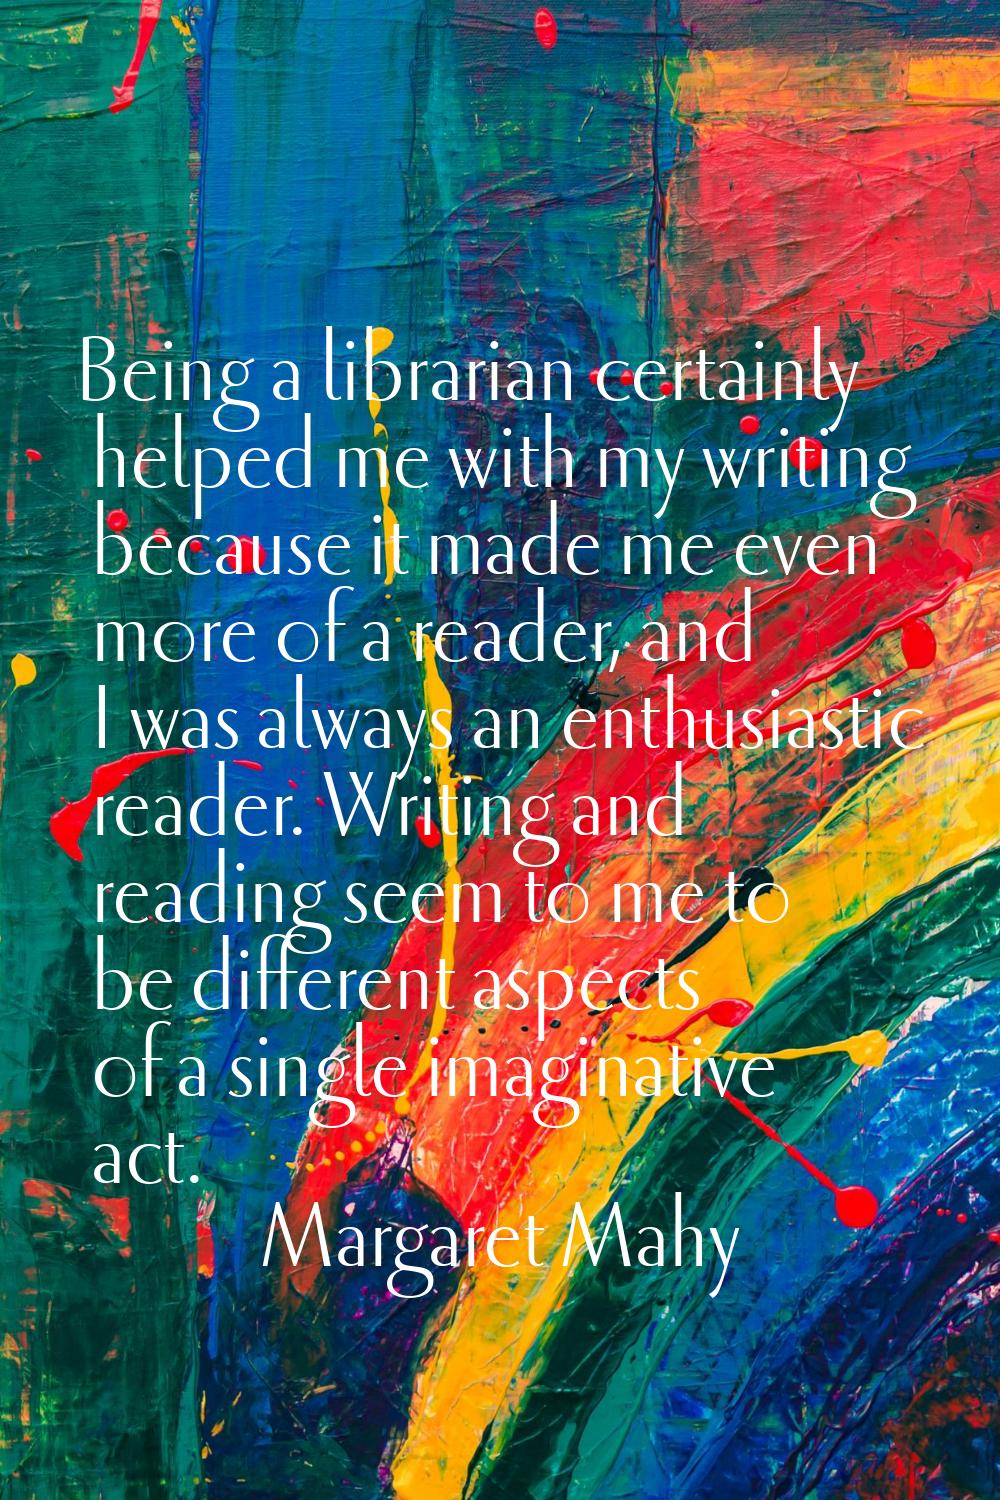 Being a librarian certainly helped me with my writing because it made me even more of a reader, and